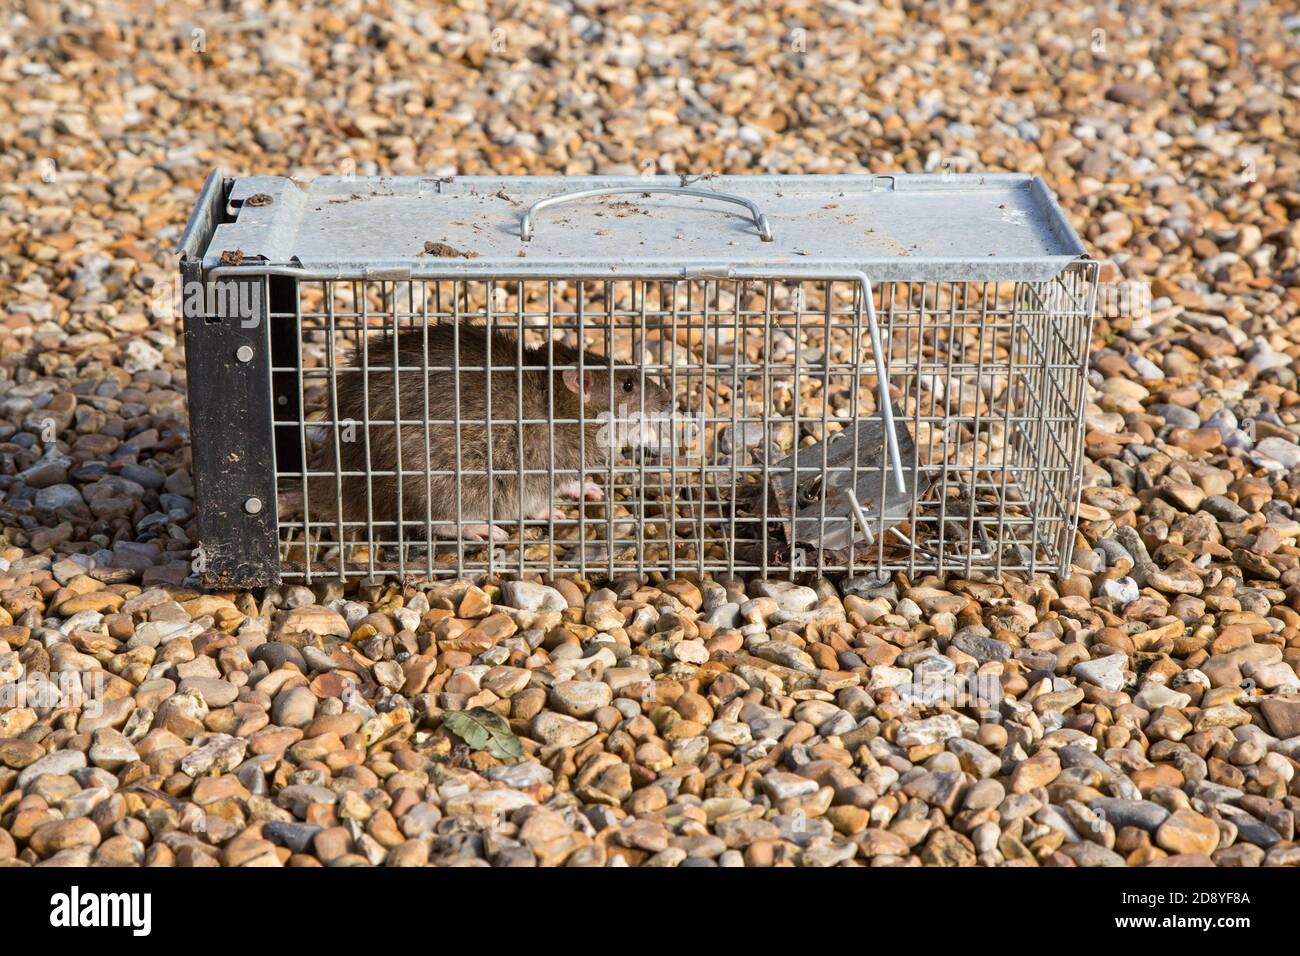 Large brown trap in a humane live trap, Hampshire, England, United Kingdom. Stock Photo